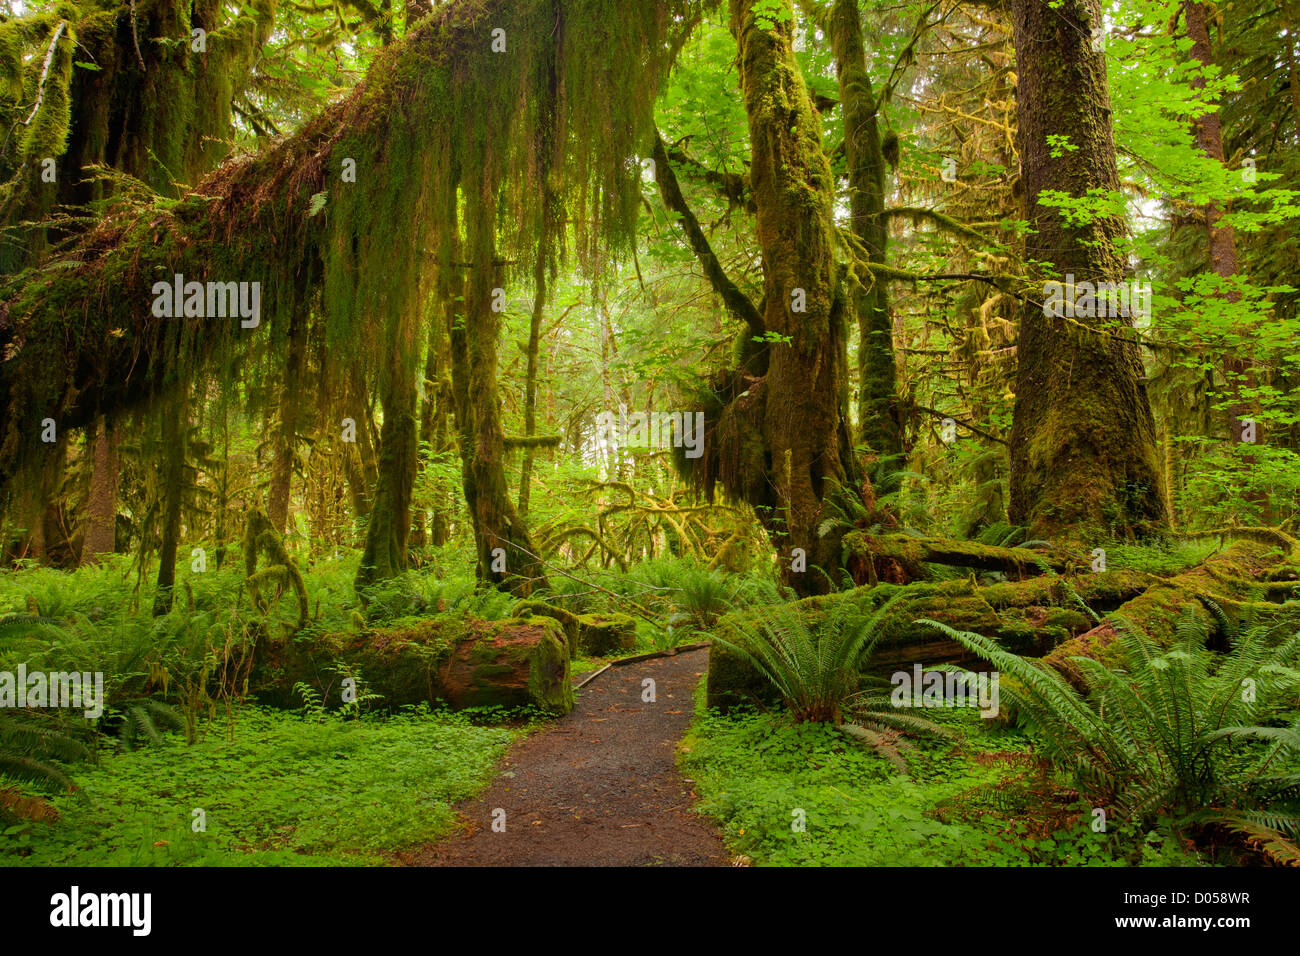 WA06653-00...WASHINGTON - Maple Glade Nature Trail in the heart of the Quinault Rain Forest in Olympic National Park. Stock Photo